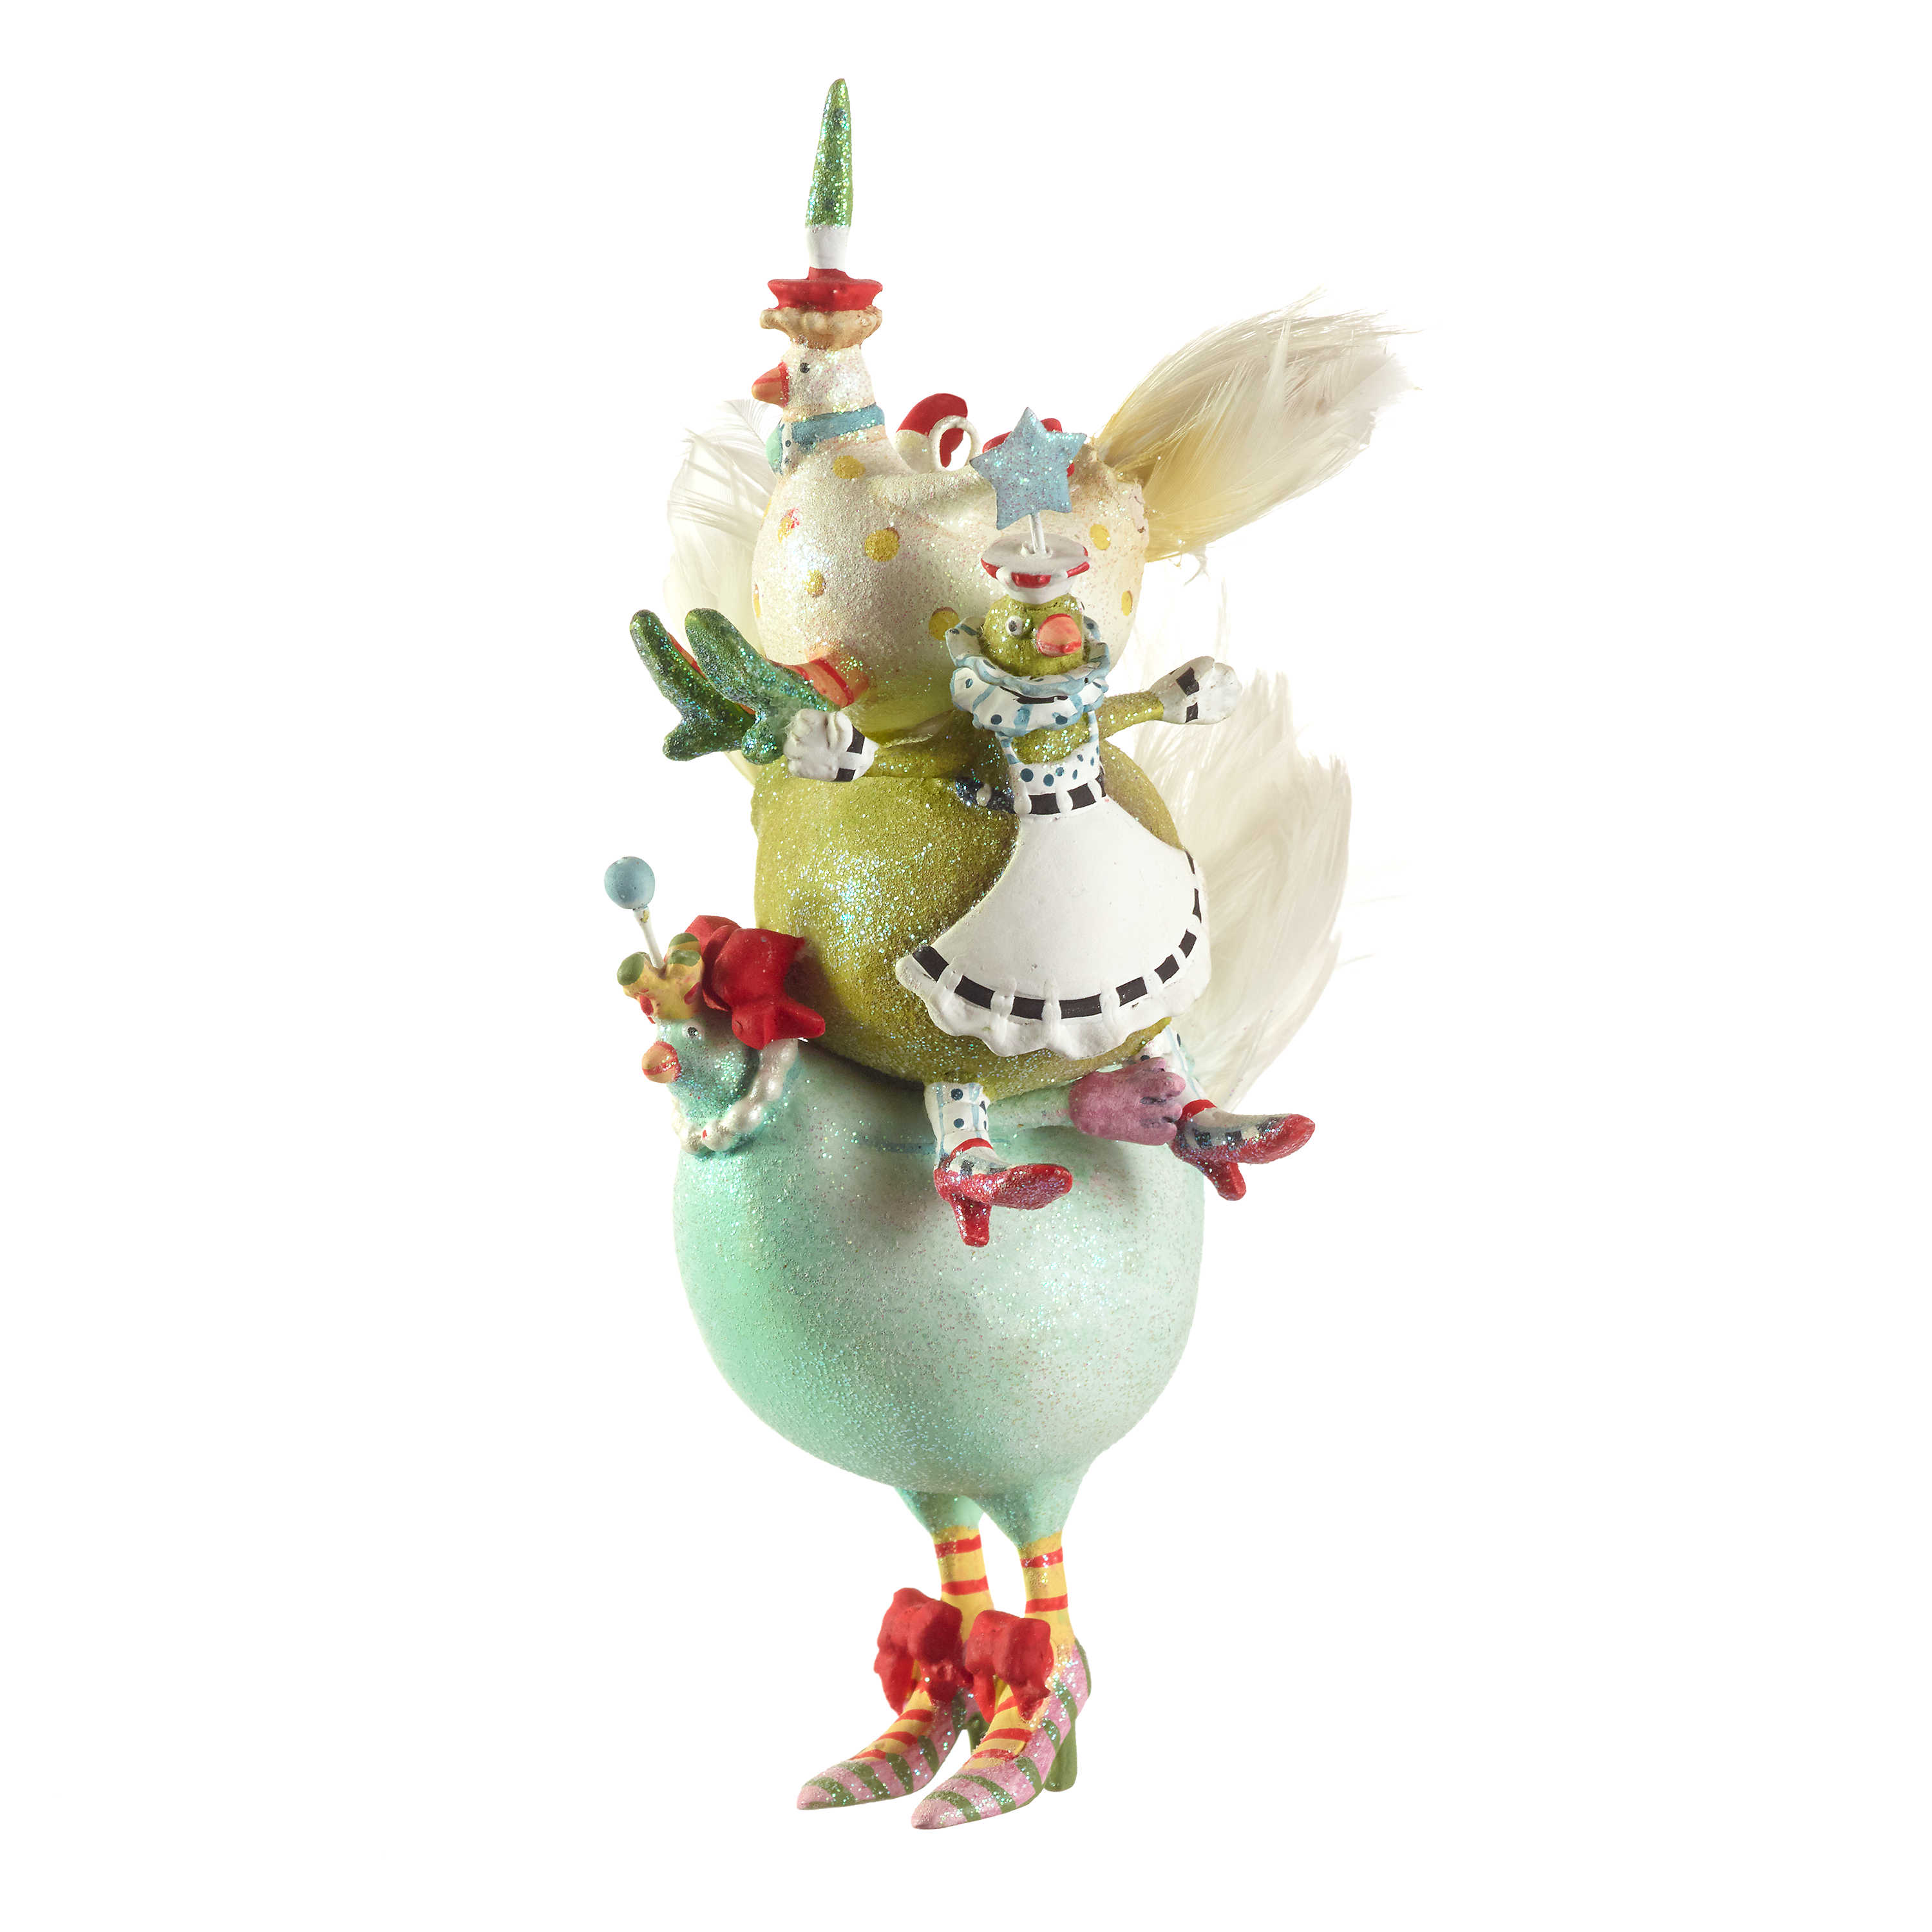 Patience Brewster 12 Days 3 French Hens Ornament mackenzie-childs Panama 0